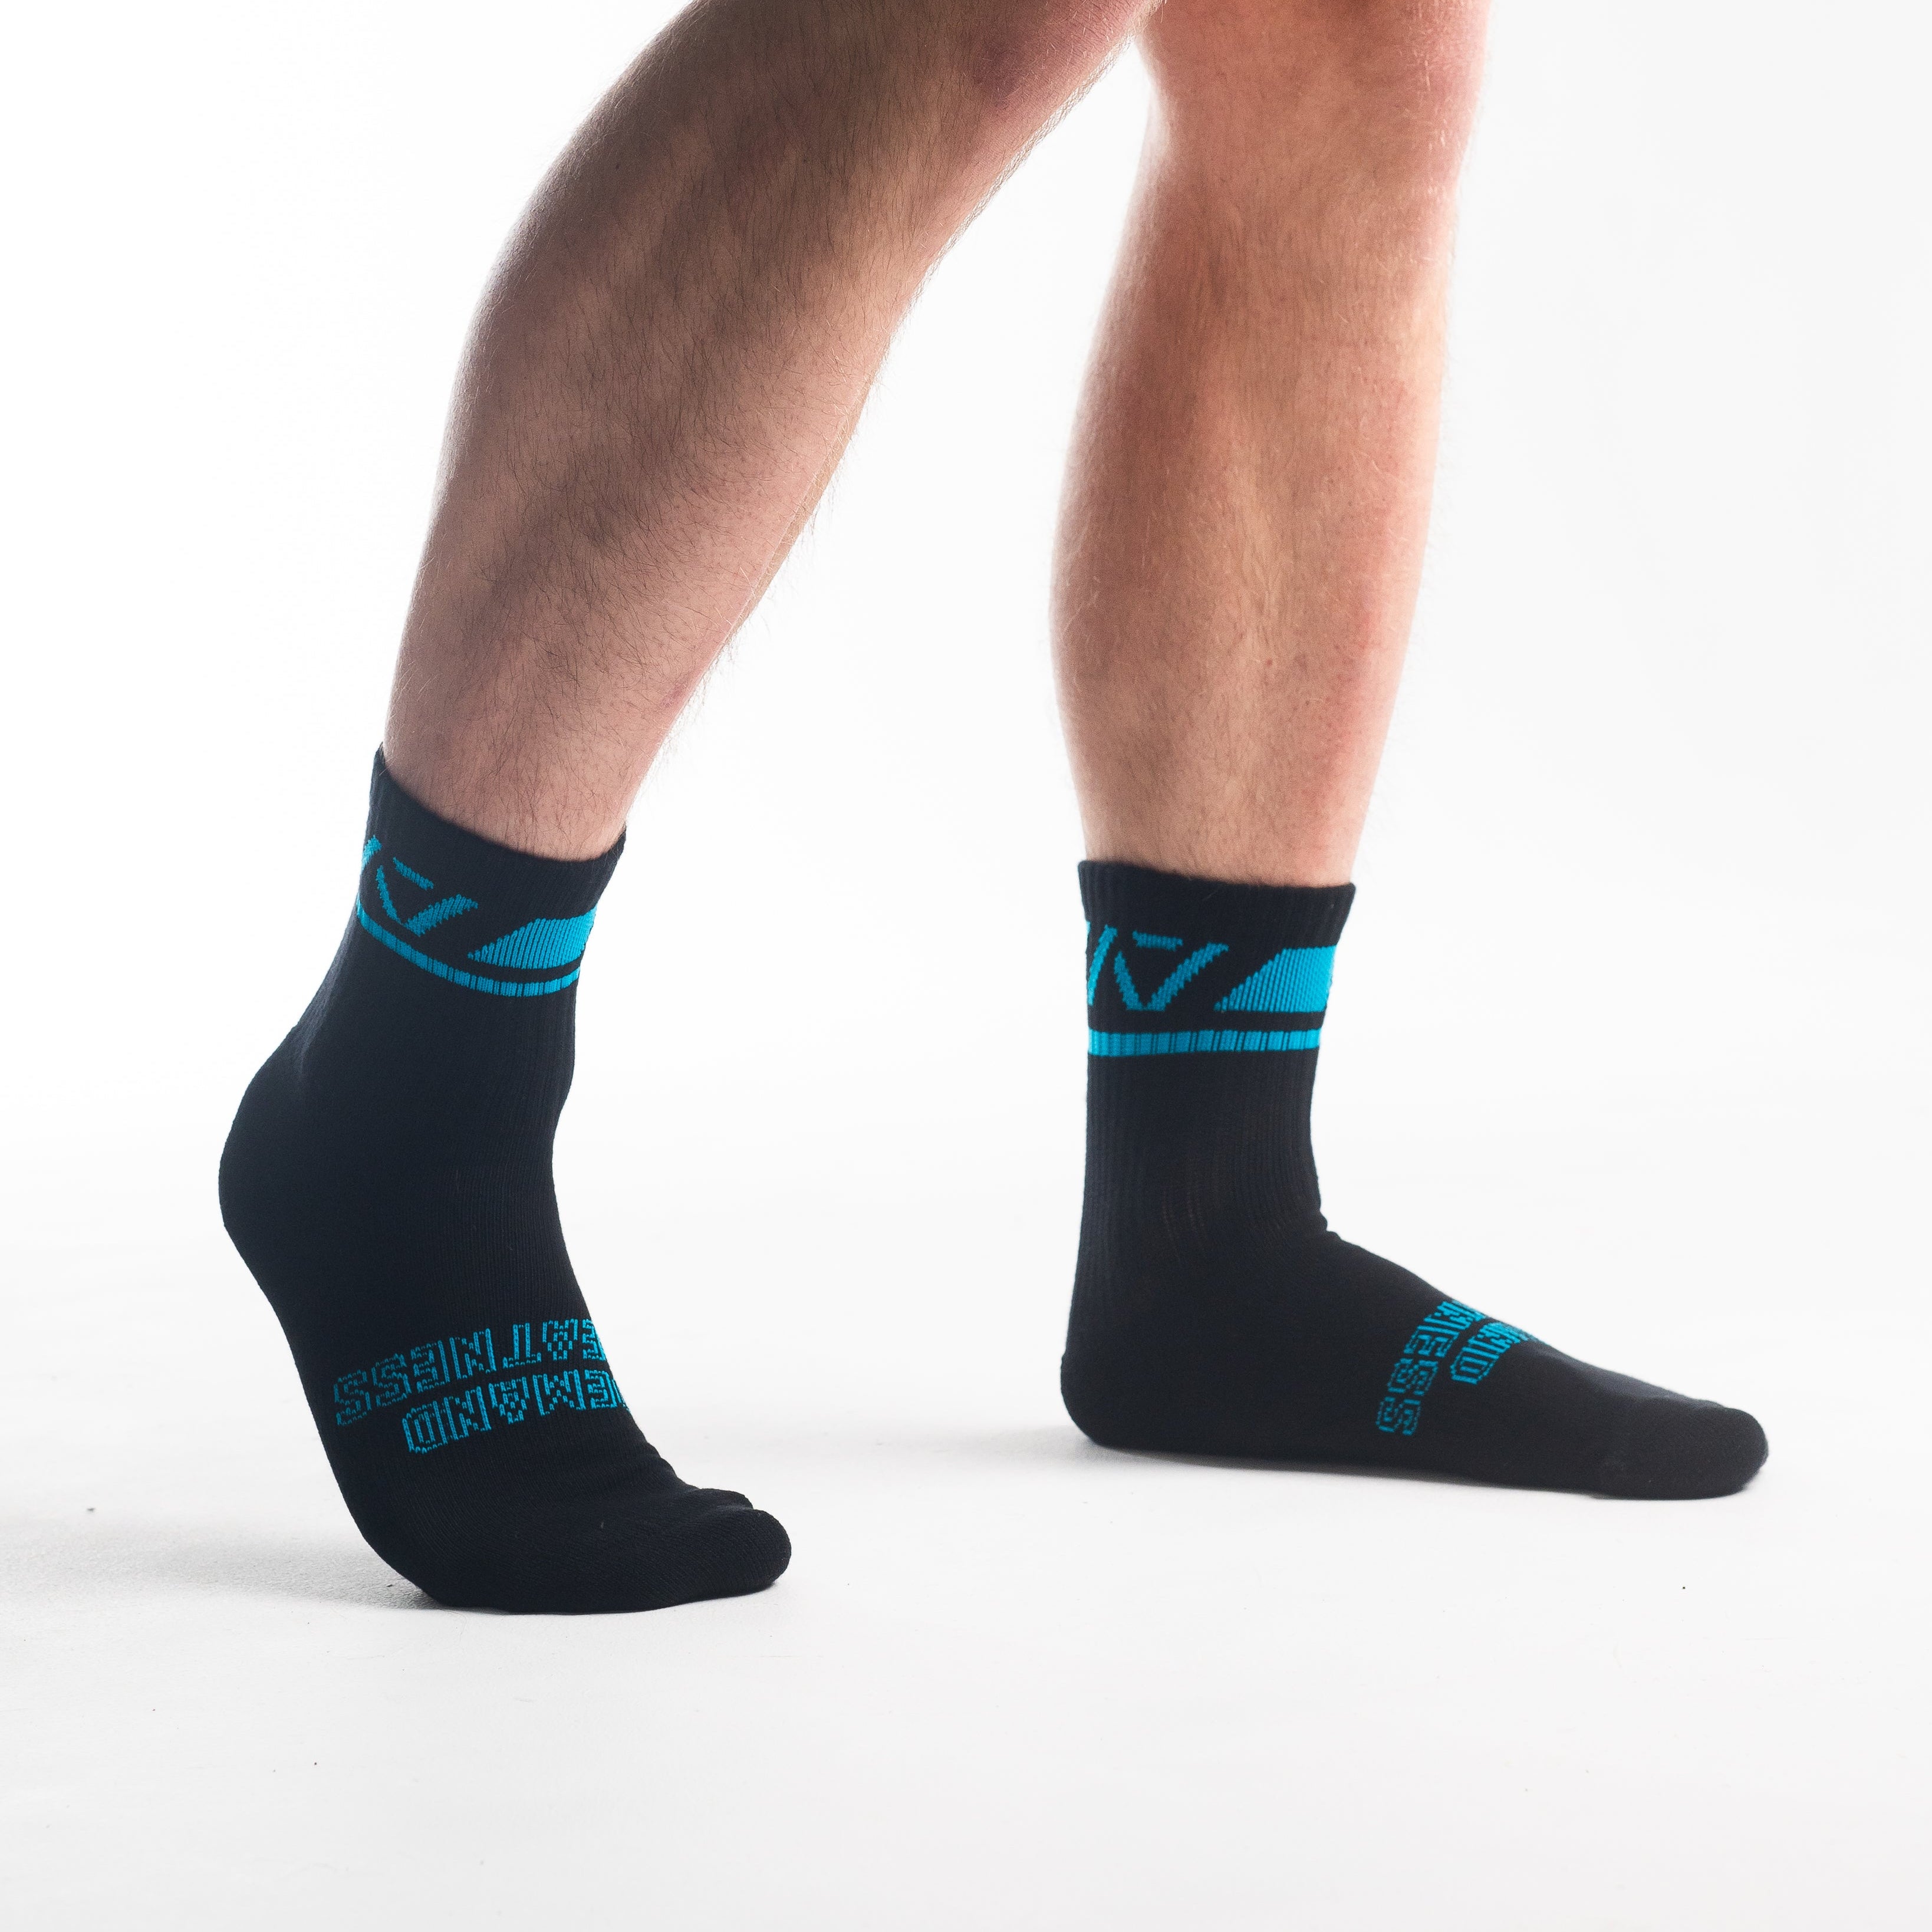 A7 Azul Crew socks showcase blue logos and let your energy show on the platform, in your training or while out and about. The IPF Approved Azul Meet Kit includes Powerlifting Singlet, A7 Meet Shirt, A7 Deadlift Socks. All A7 Powerlifting Equipment shipping to UK, Norway, Switzerland and Iceland.